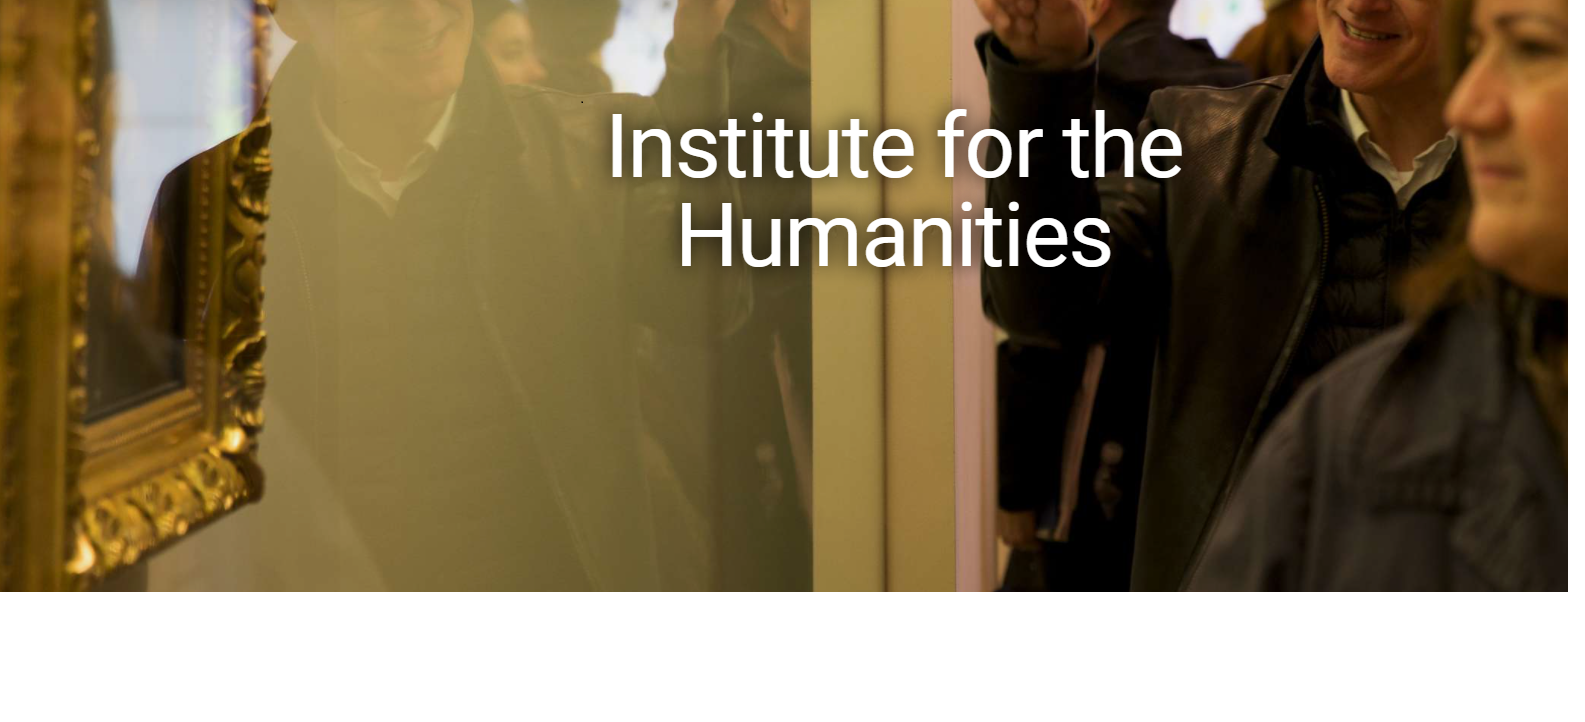 Institute for the Humanities